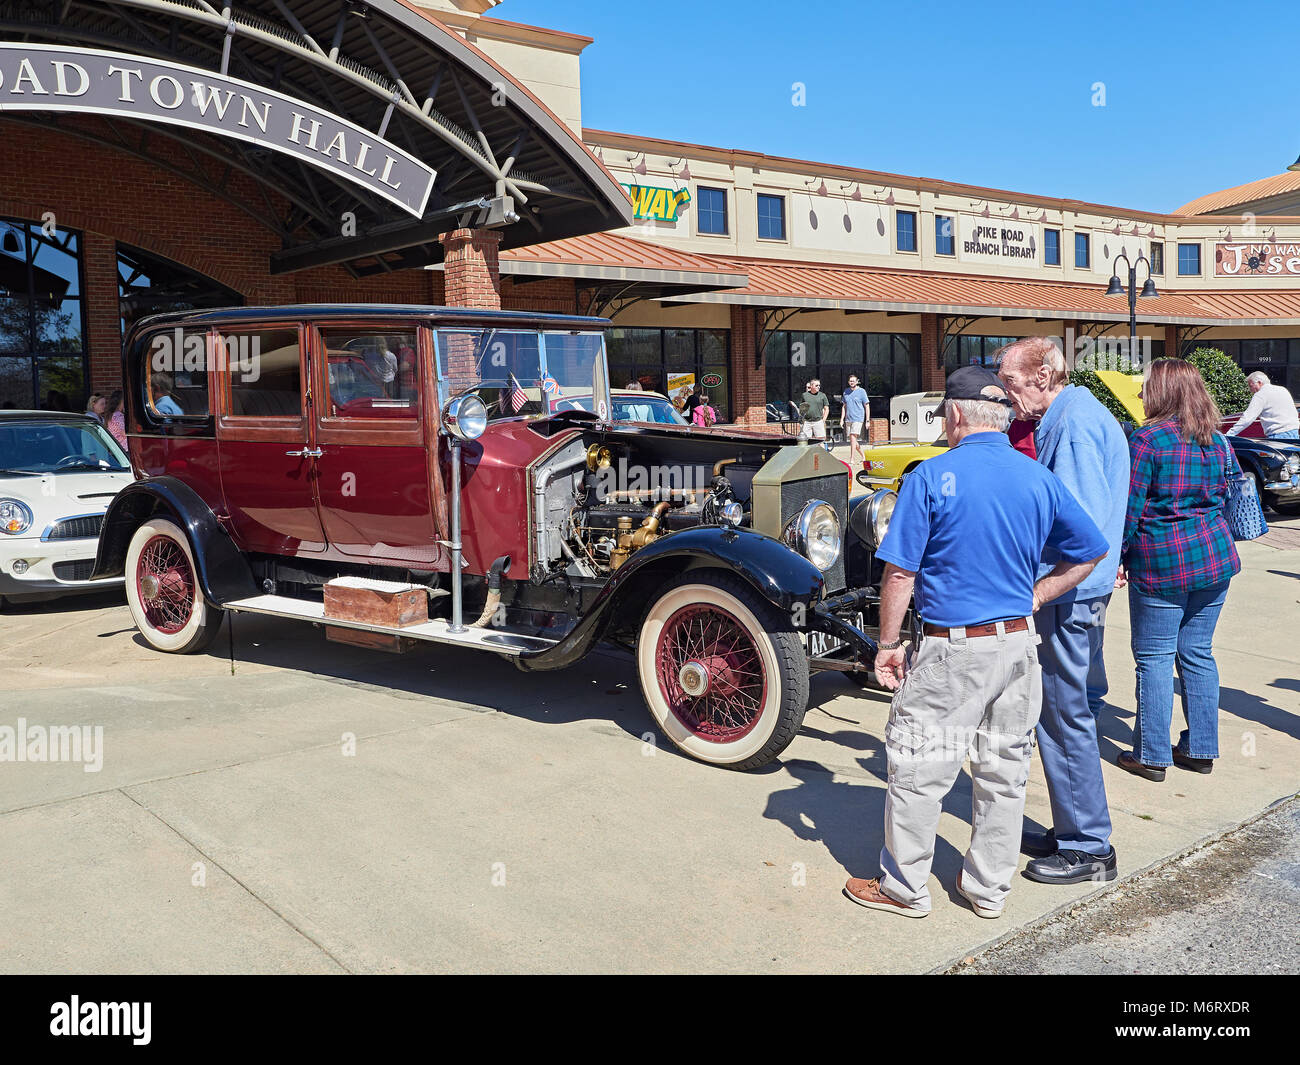 British classic car enthusiast looking over a 1924 Rolls Royce Silver Ghost limousine at a local car show in Pike Road, Alabama, USA. Stock Photo